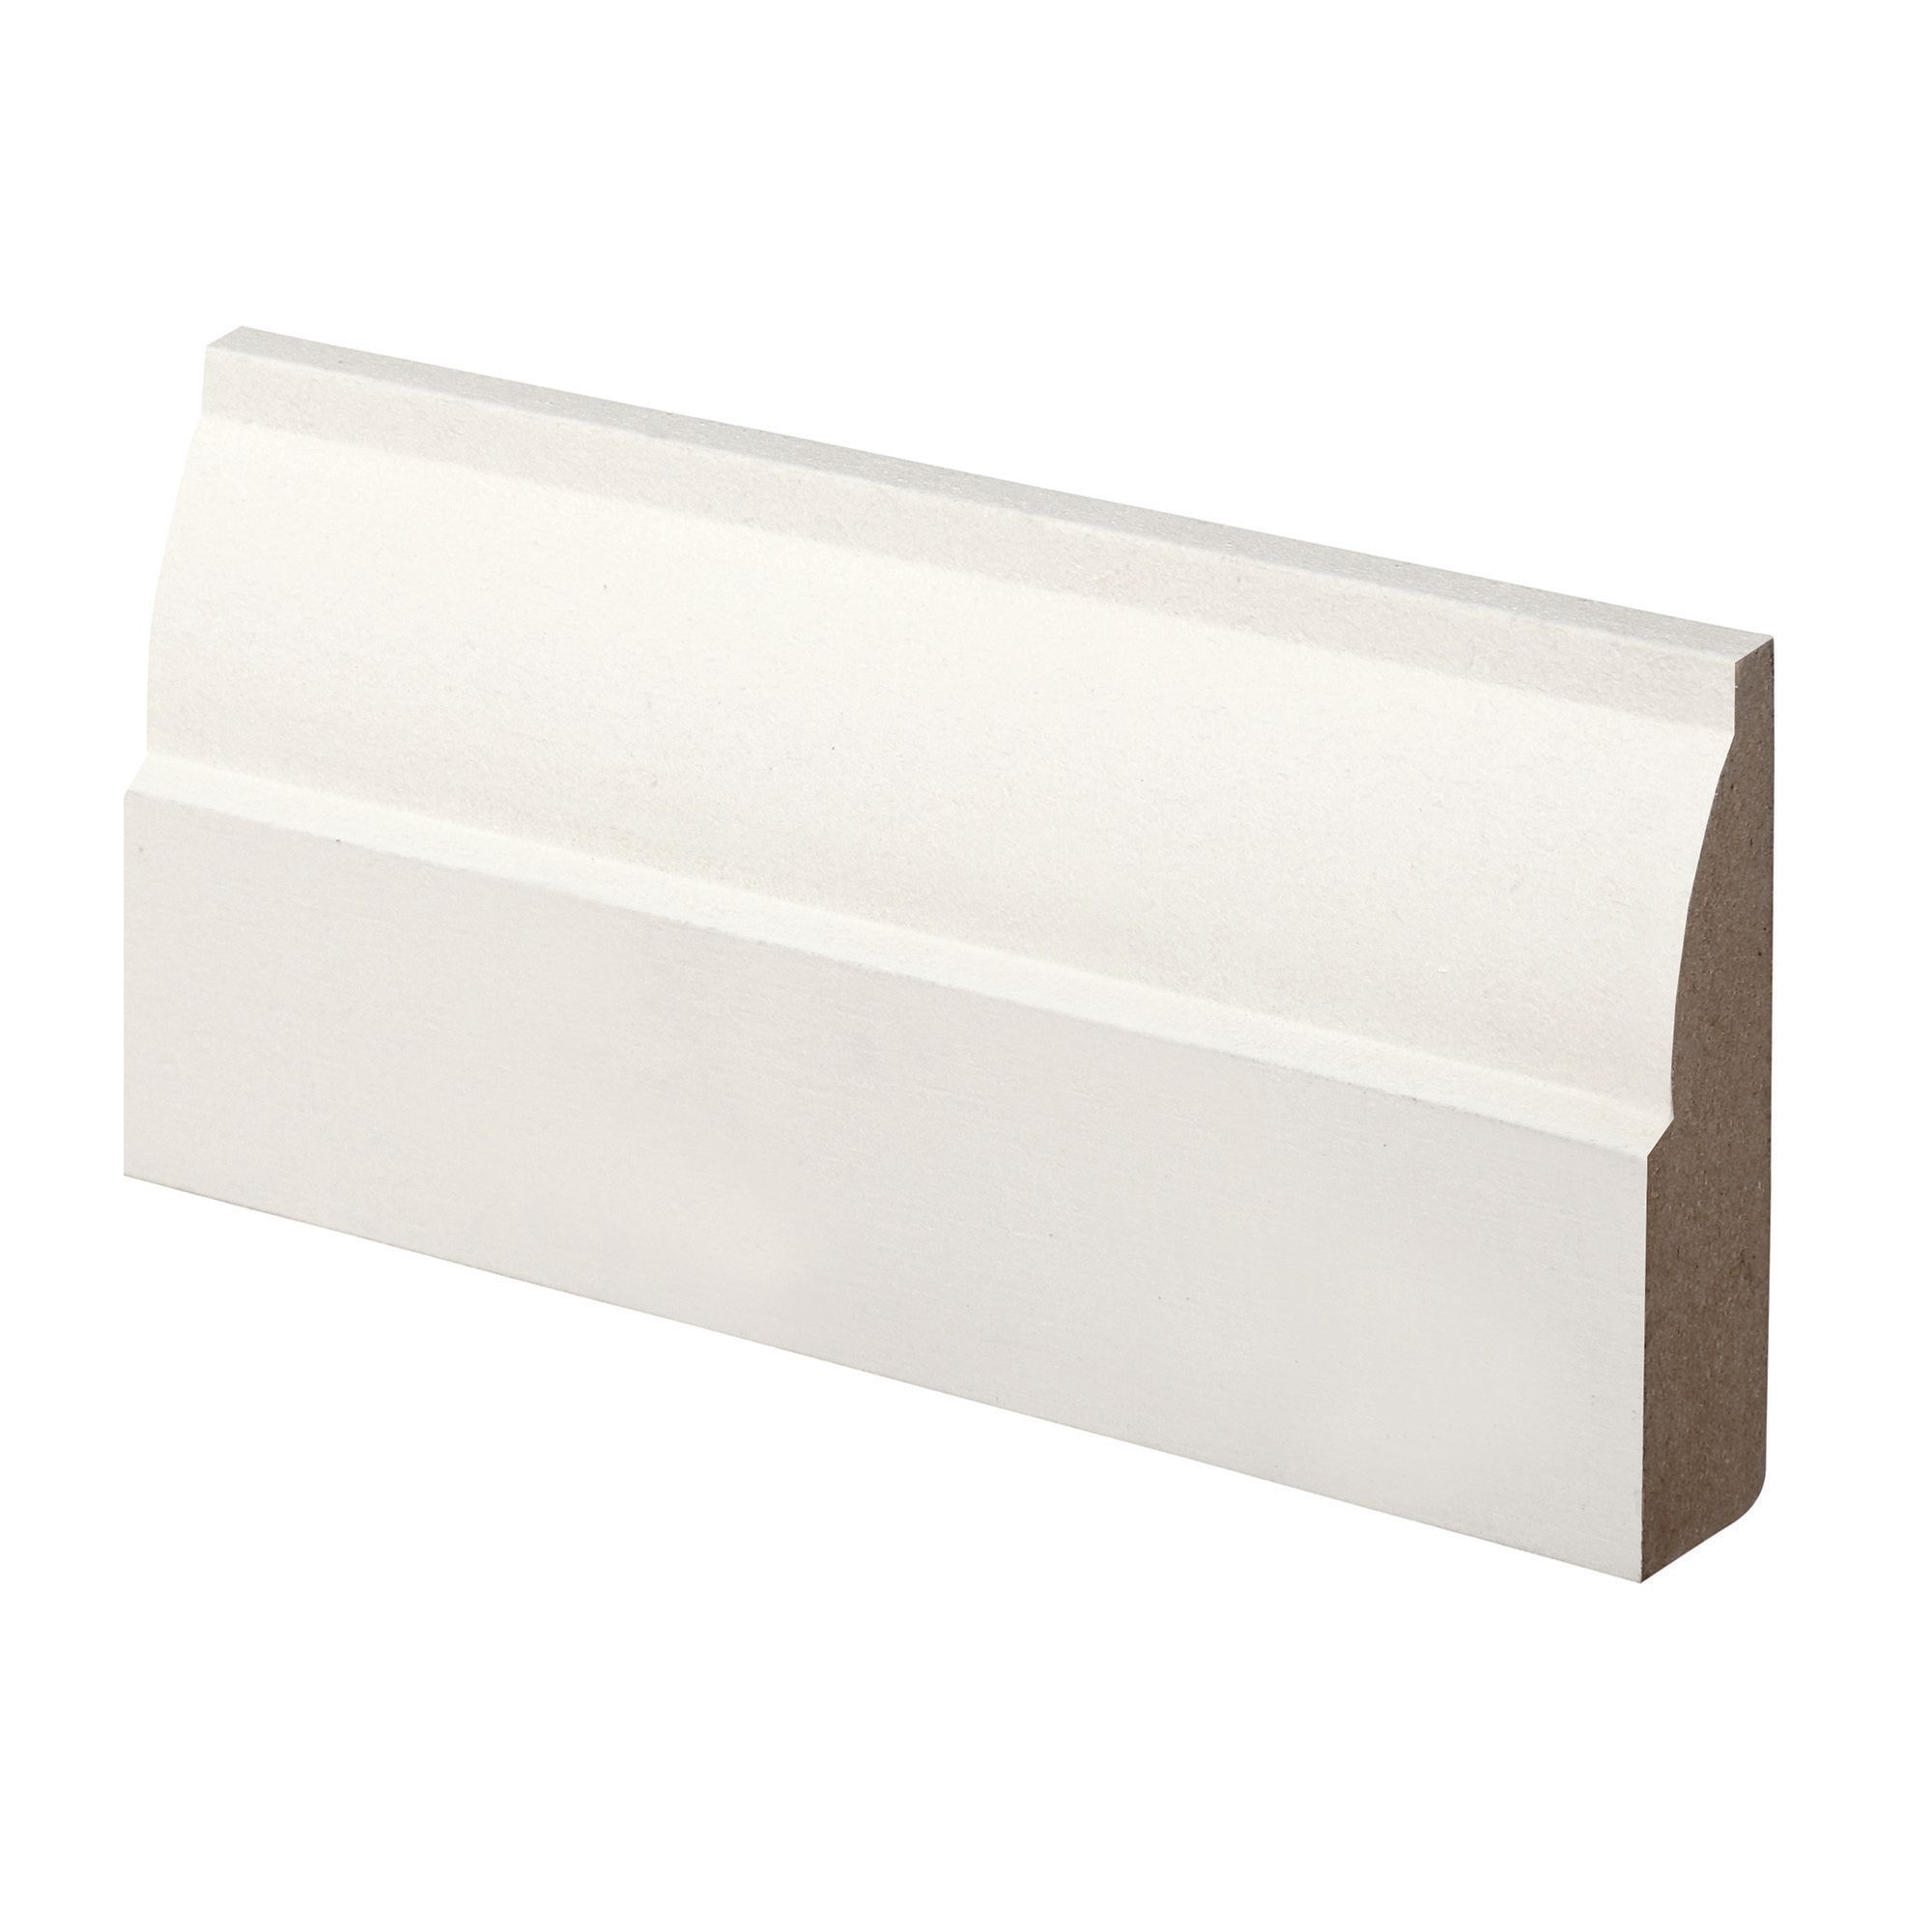 Image of Wickes Ovolo Primed MDF Architrave - 18mm x 69mm x 2.1m Pack of 5